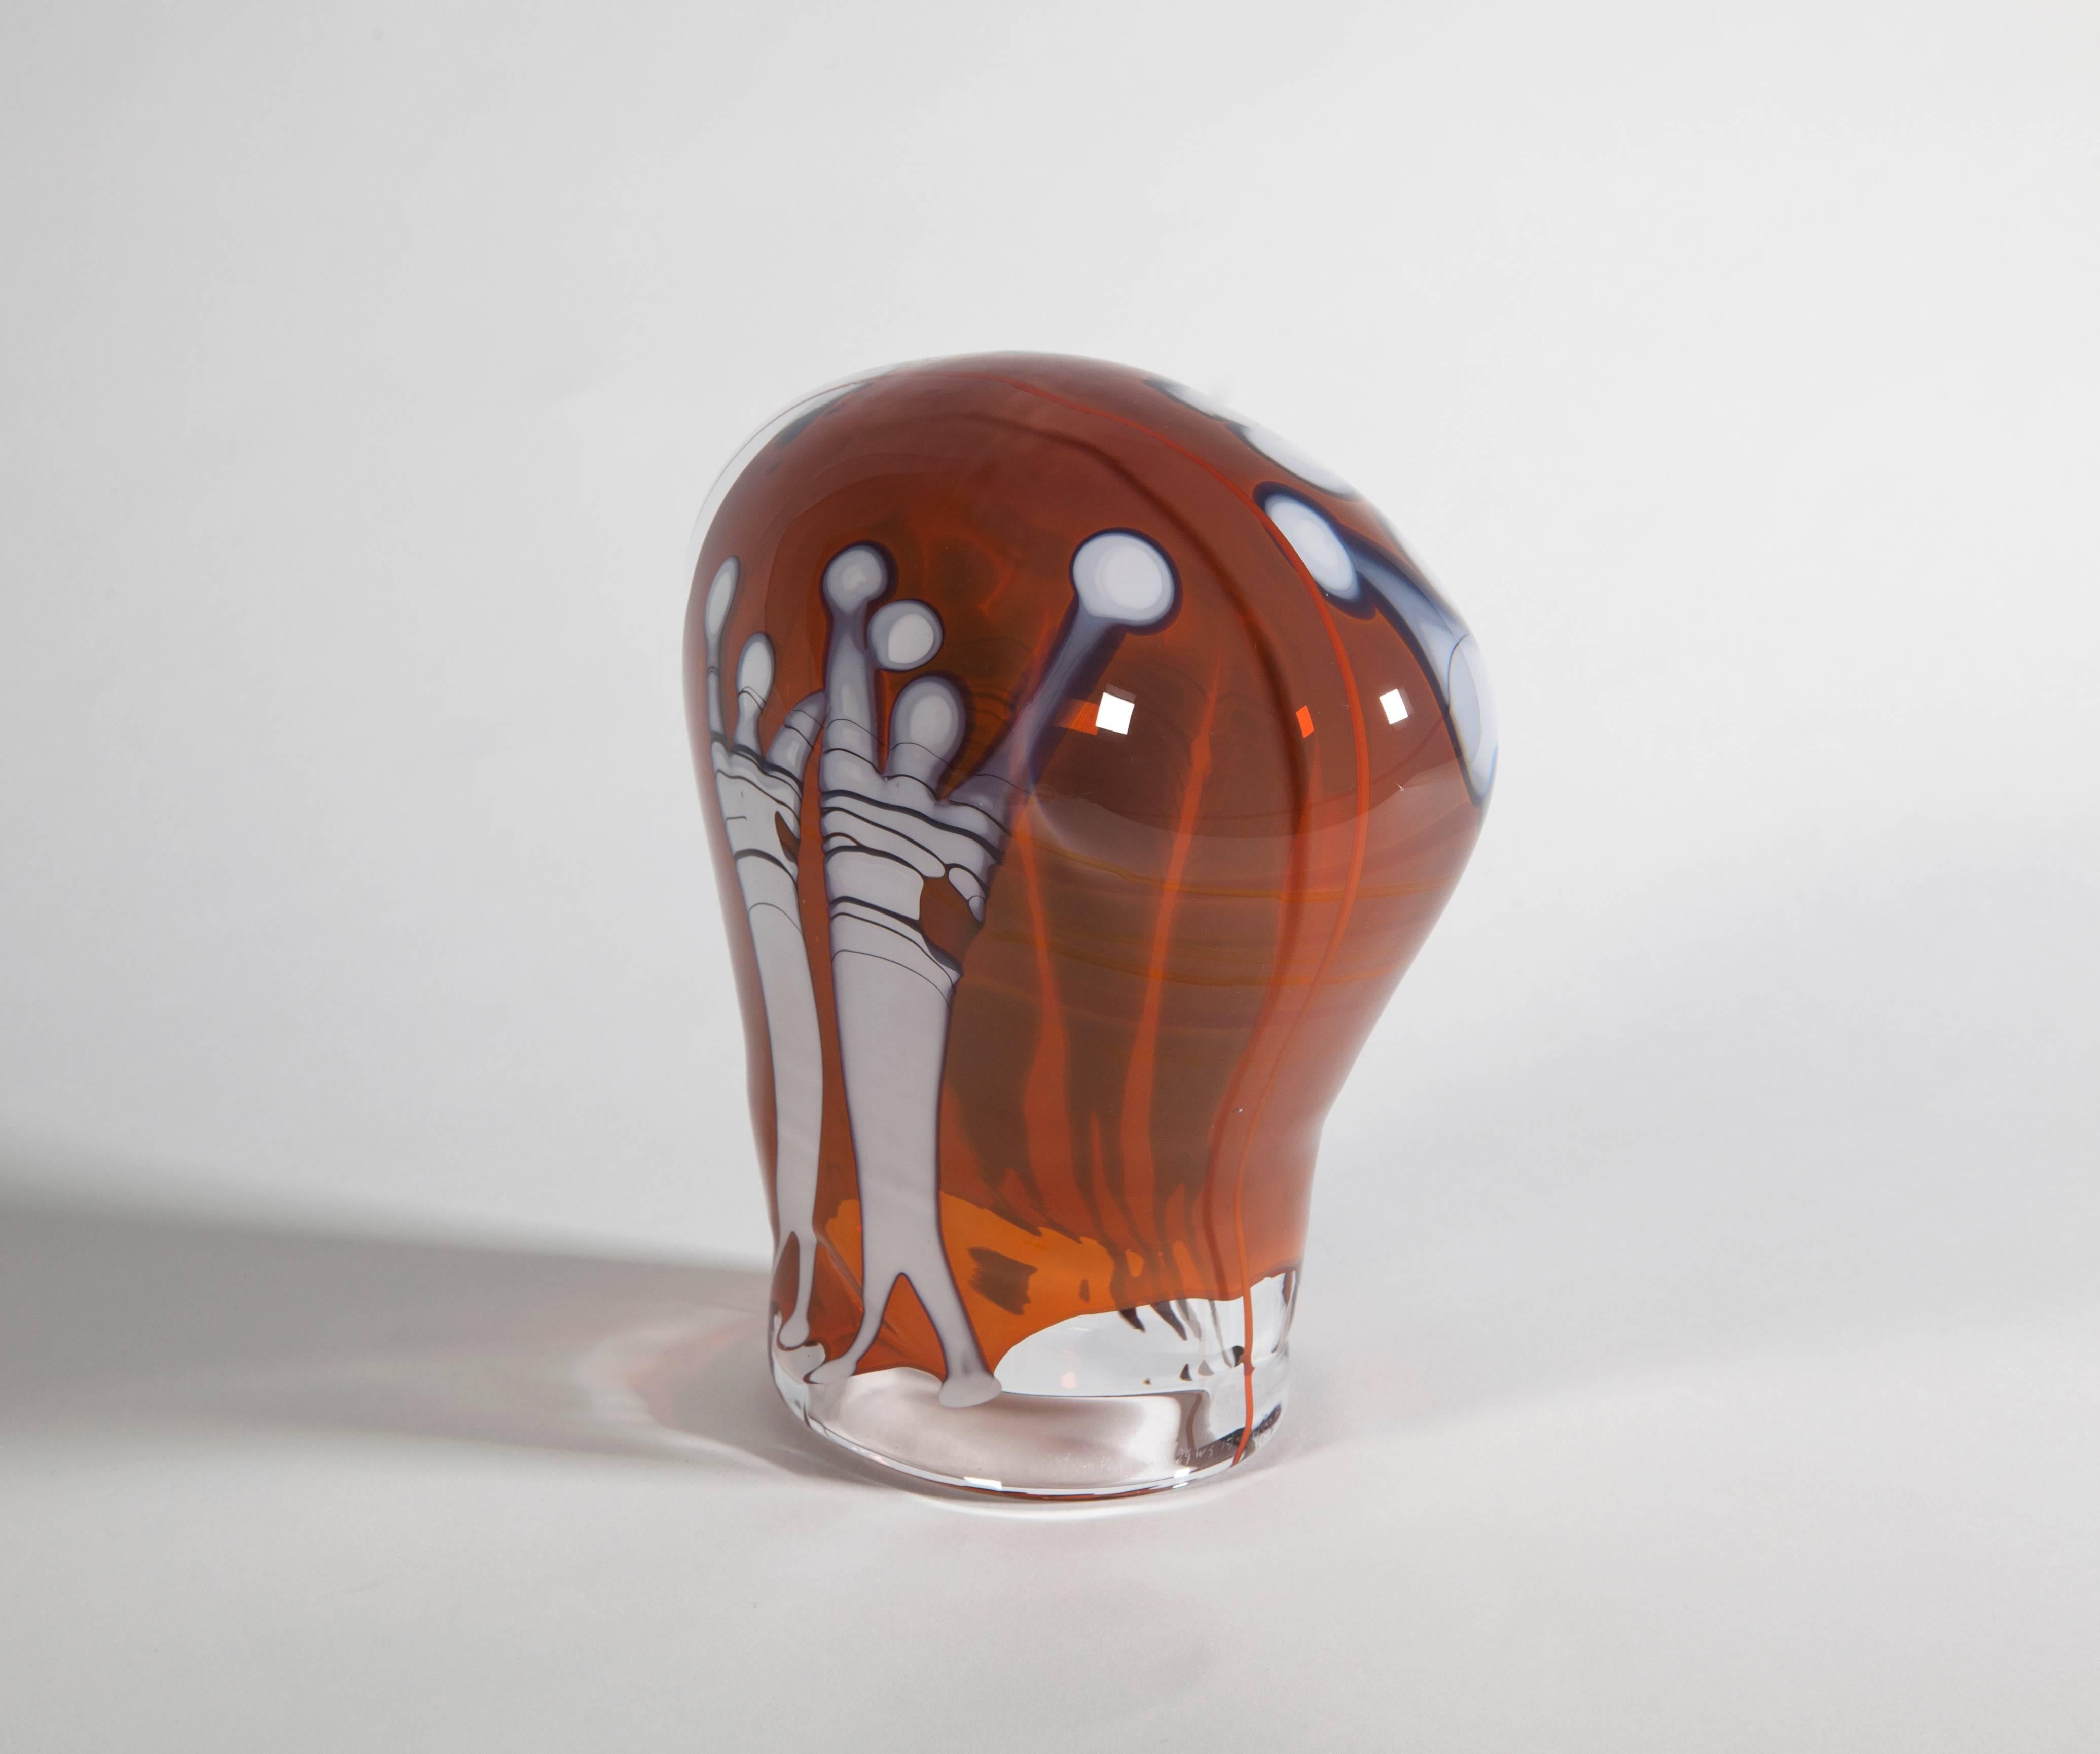 Unique Studio Glass Object by Sybren Valkema, Executed at Studio Wilke Adolfsson In Excellent Condition For Sale In Amstelveen, NL